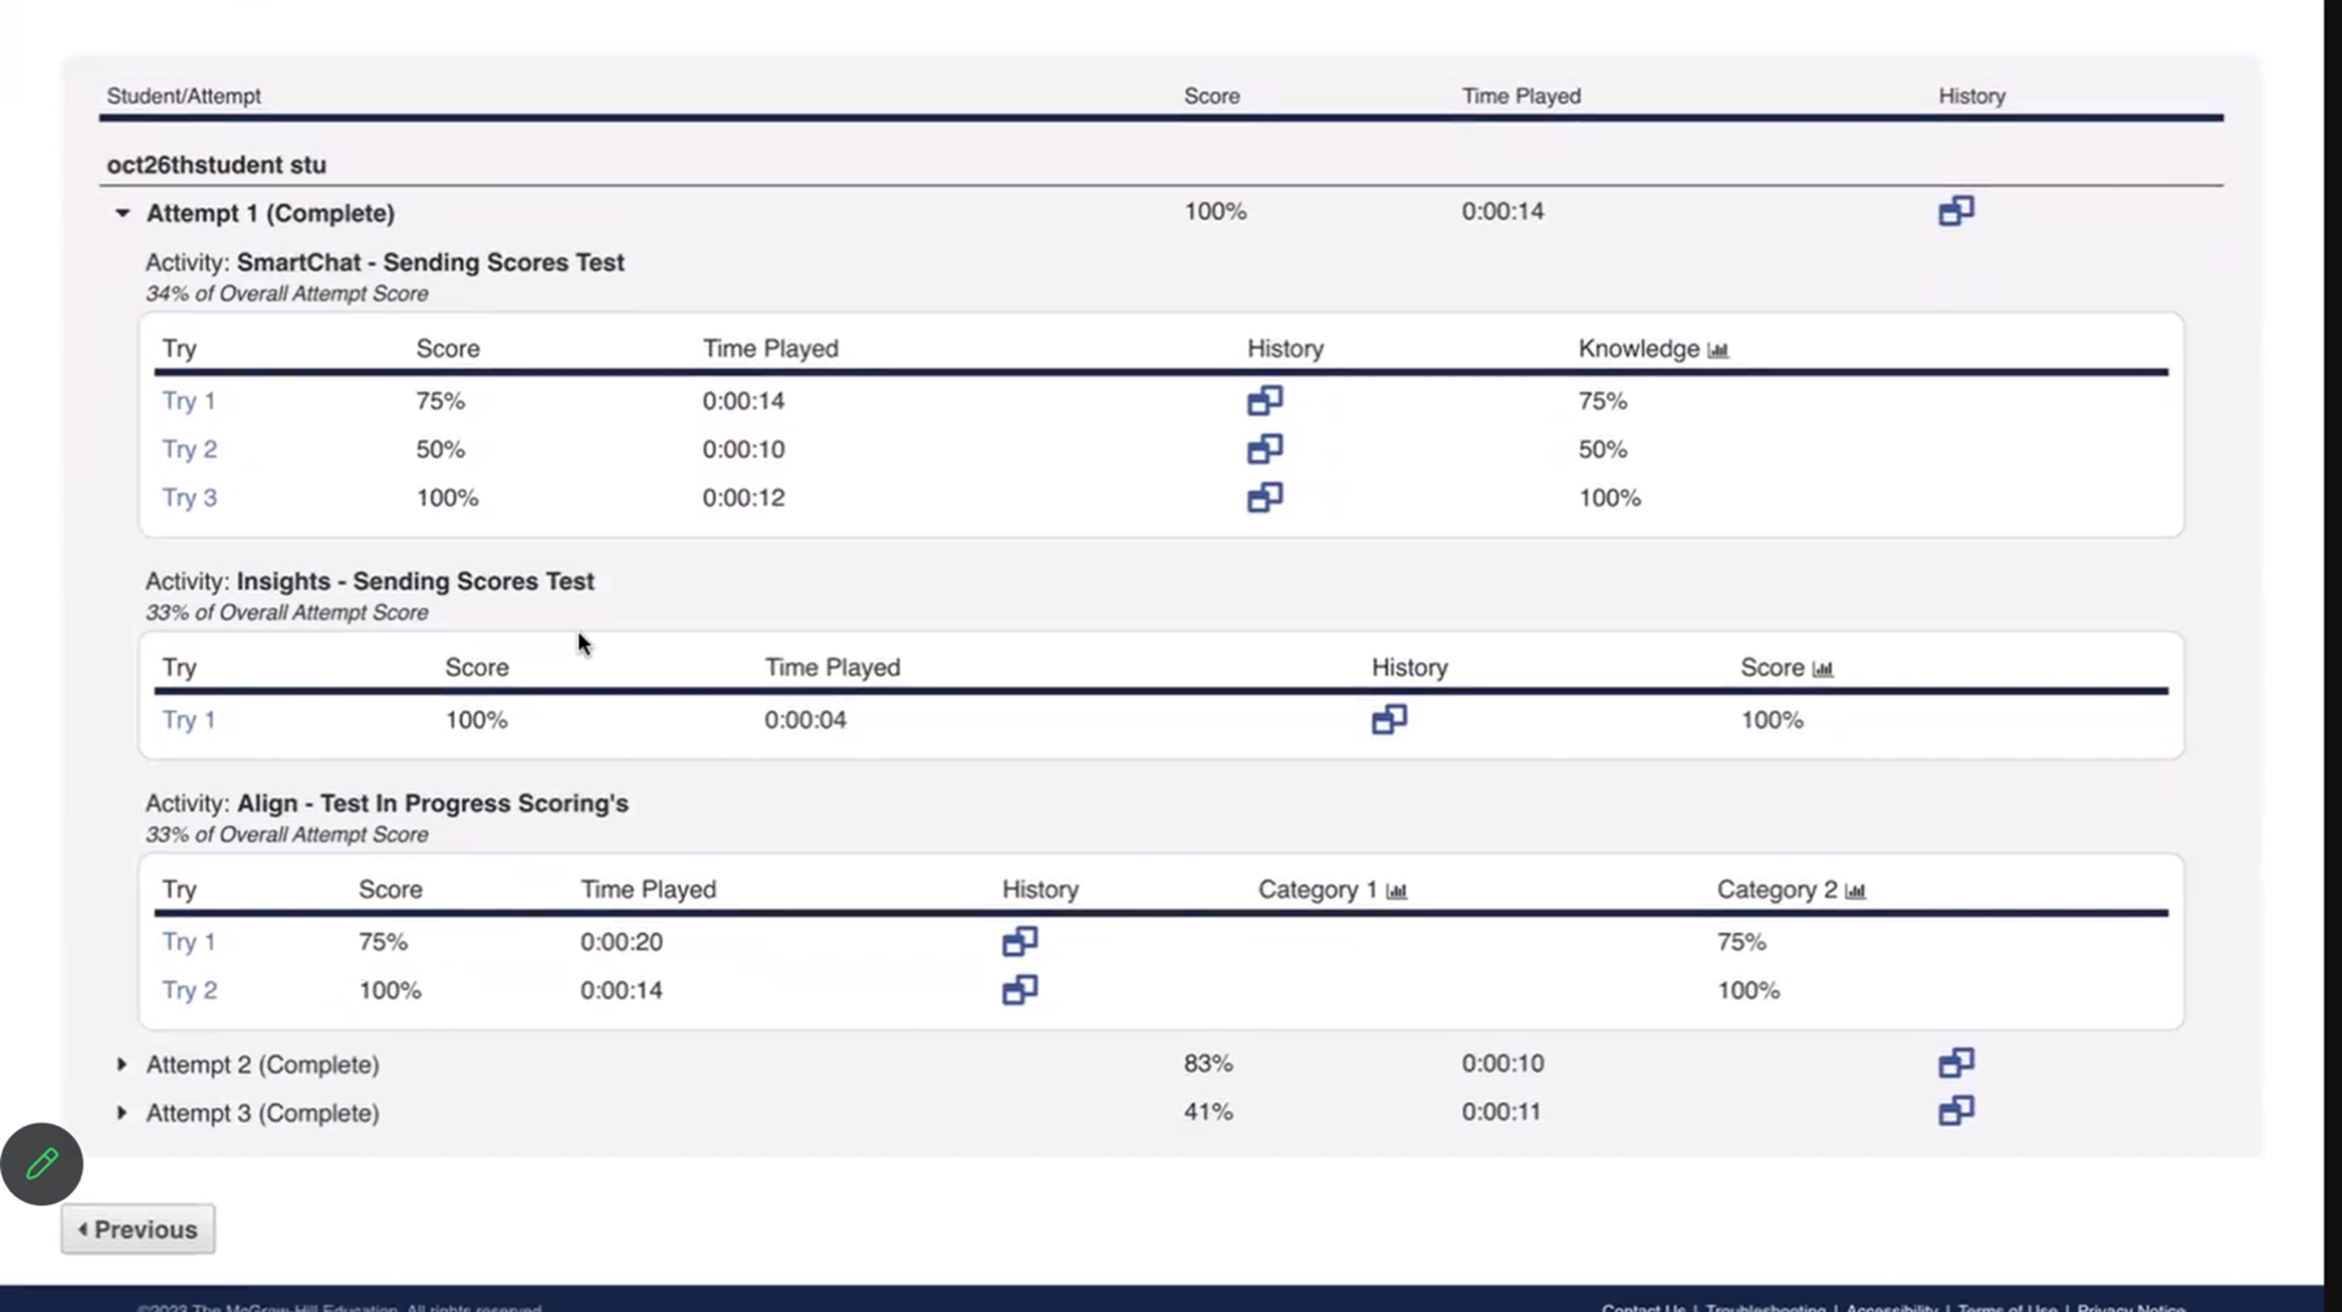 Connect screenshot showing application-based activities detailed reporting student attempts